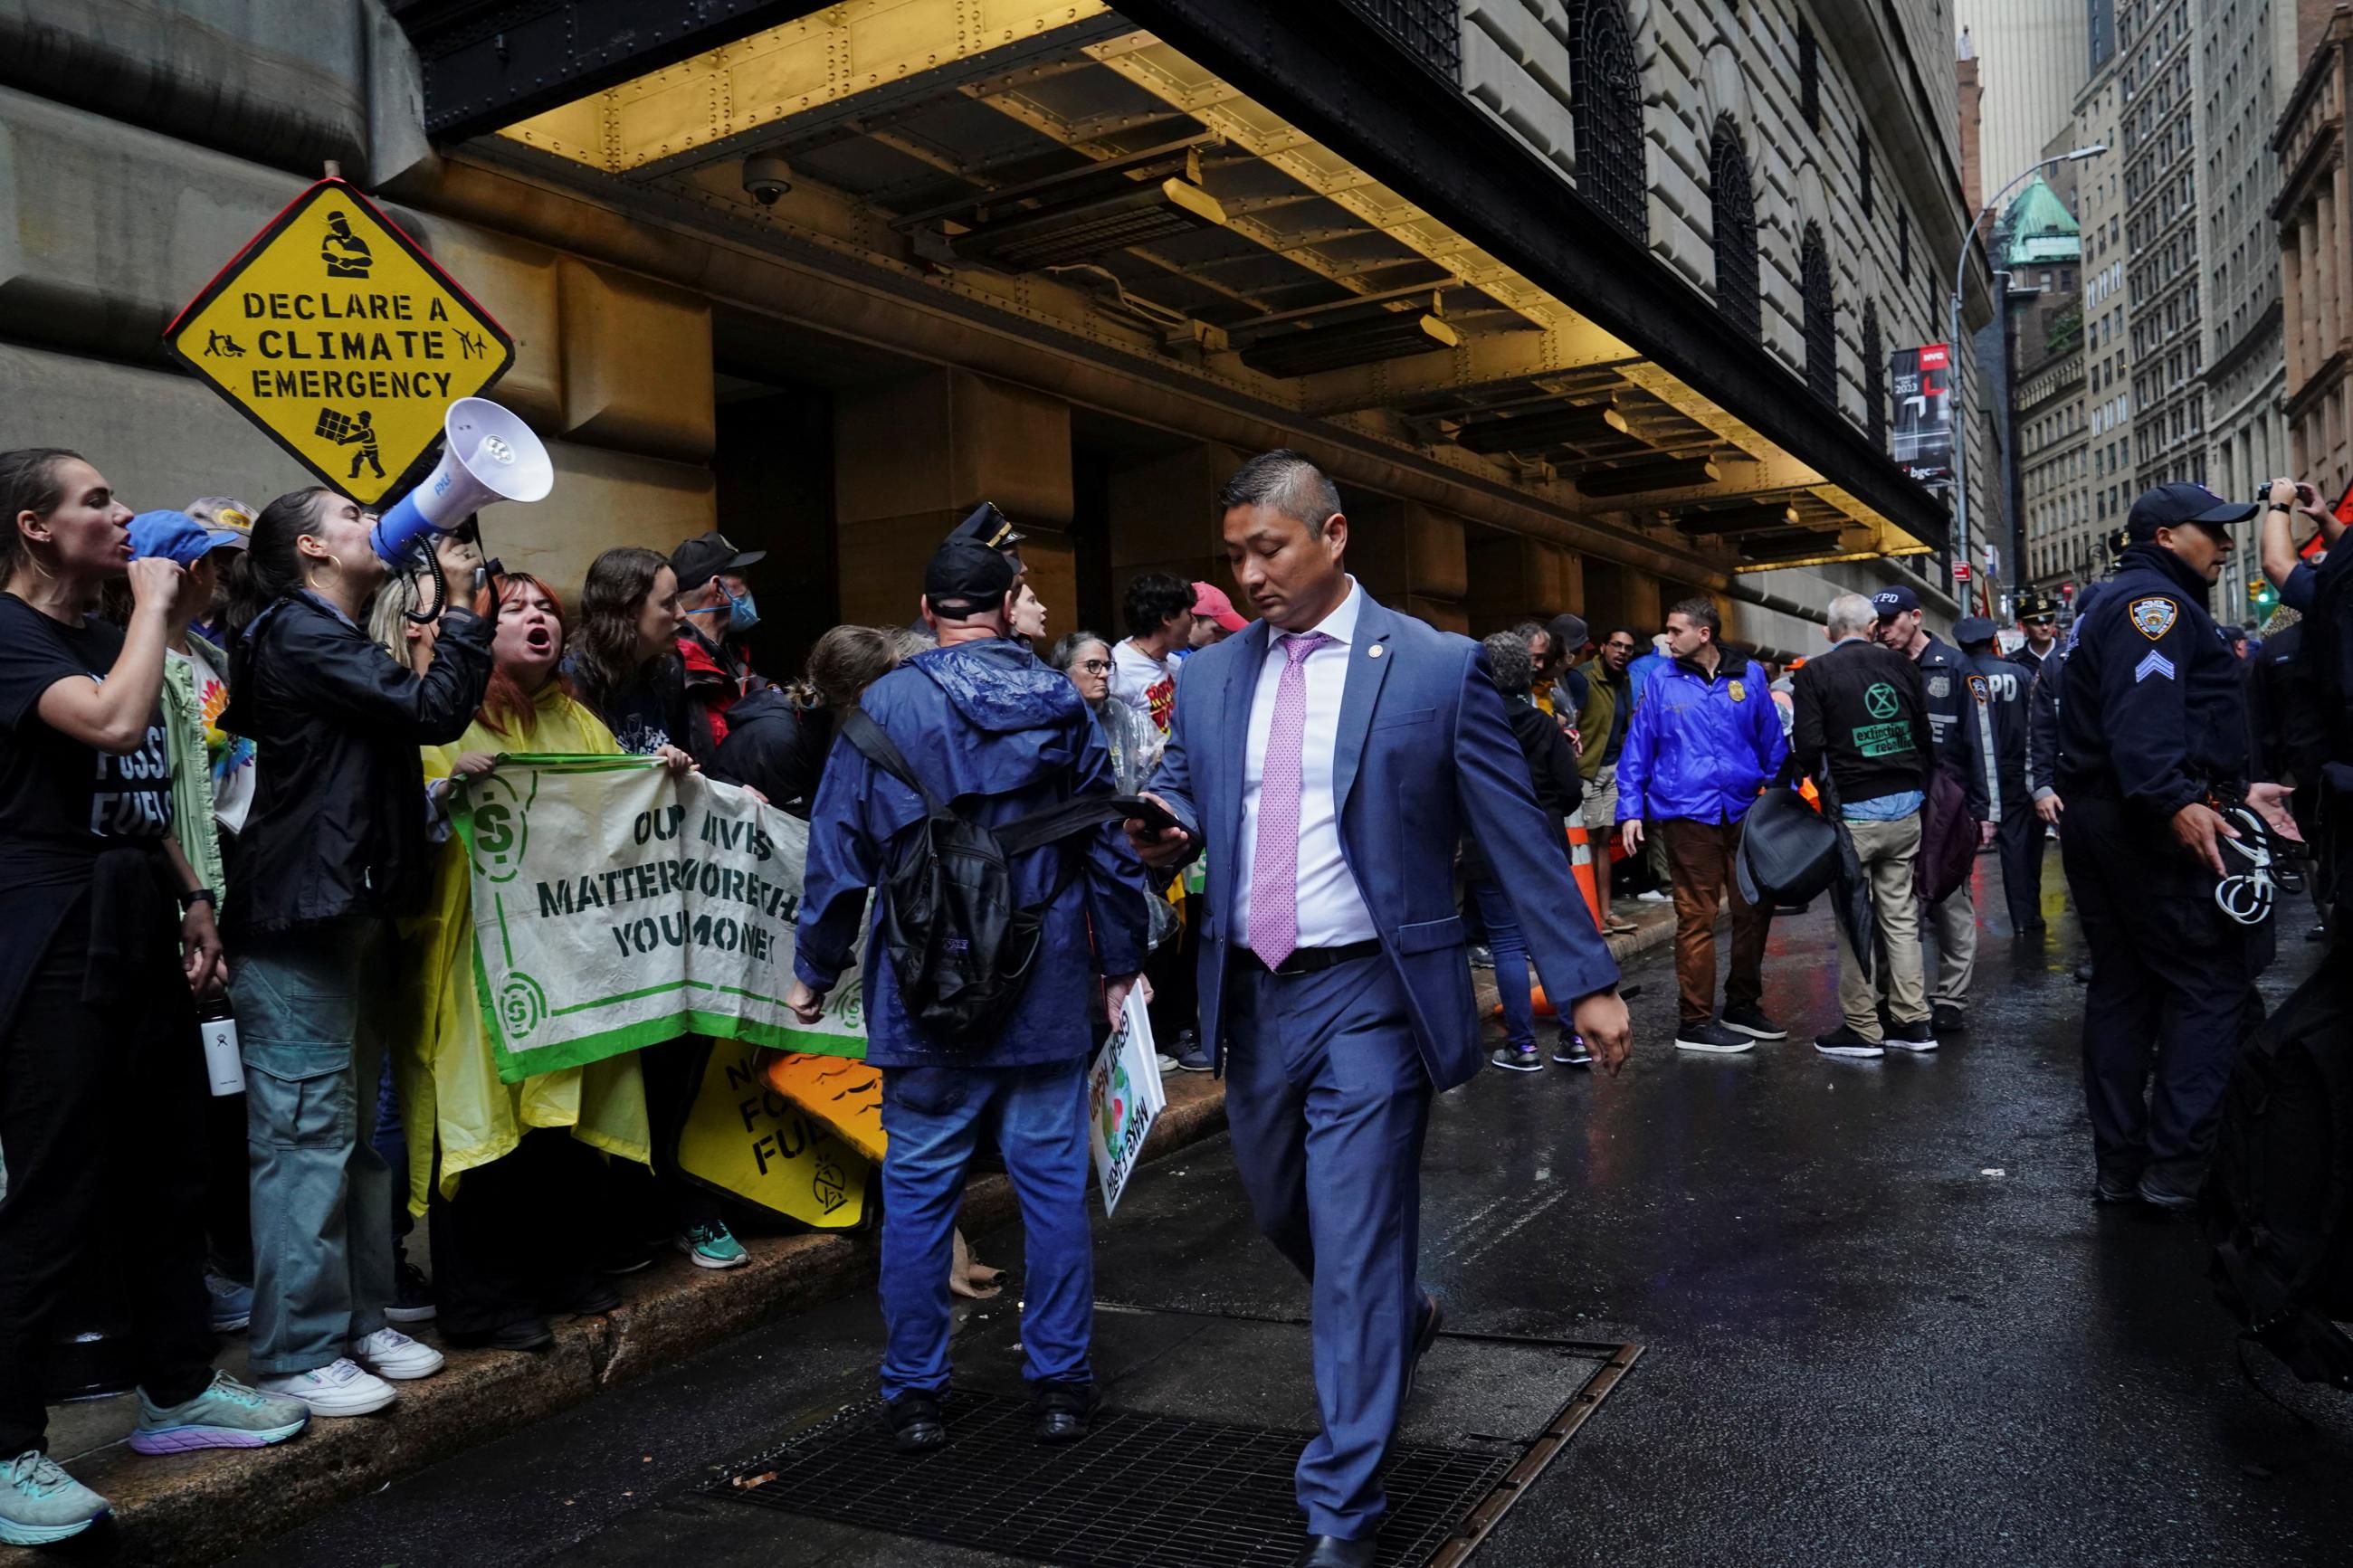 A man in a business suit walks past activists protesting outside the Federal Reserve Bank of New York during a demonstration calling for the U.S. government to take action on climate change and reject the use of fossil fuels during Climate Week in the Financial District of New York City, New York, U.S., September 18, 2023.